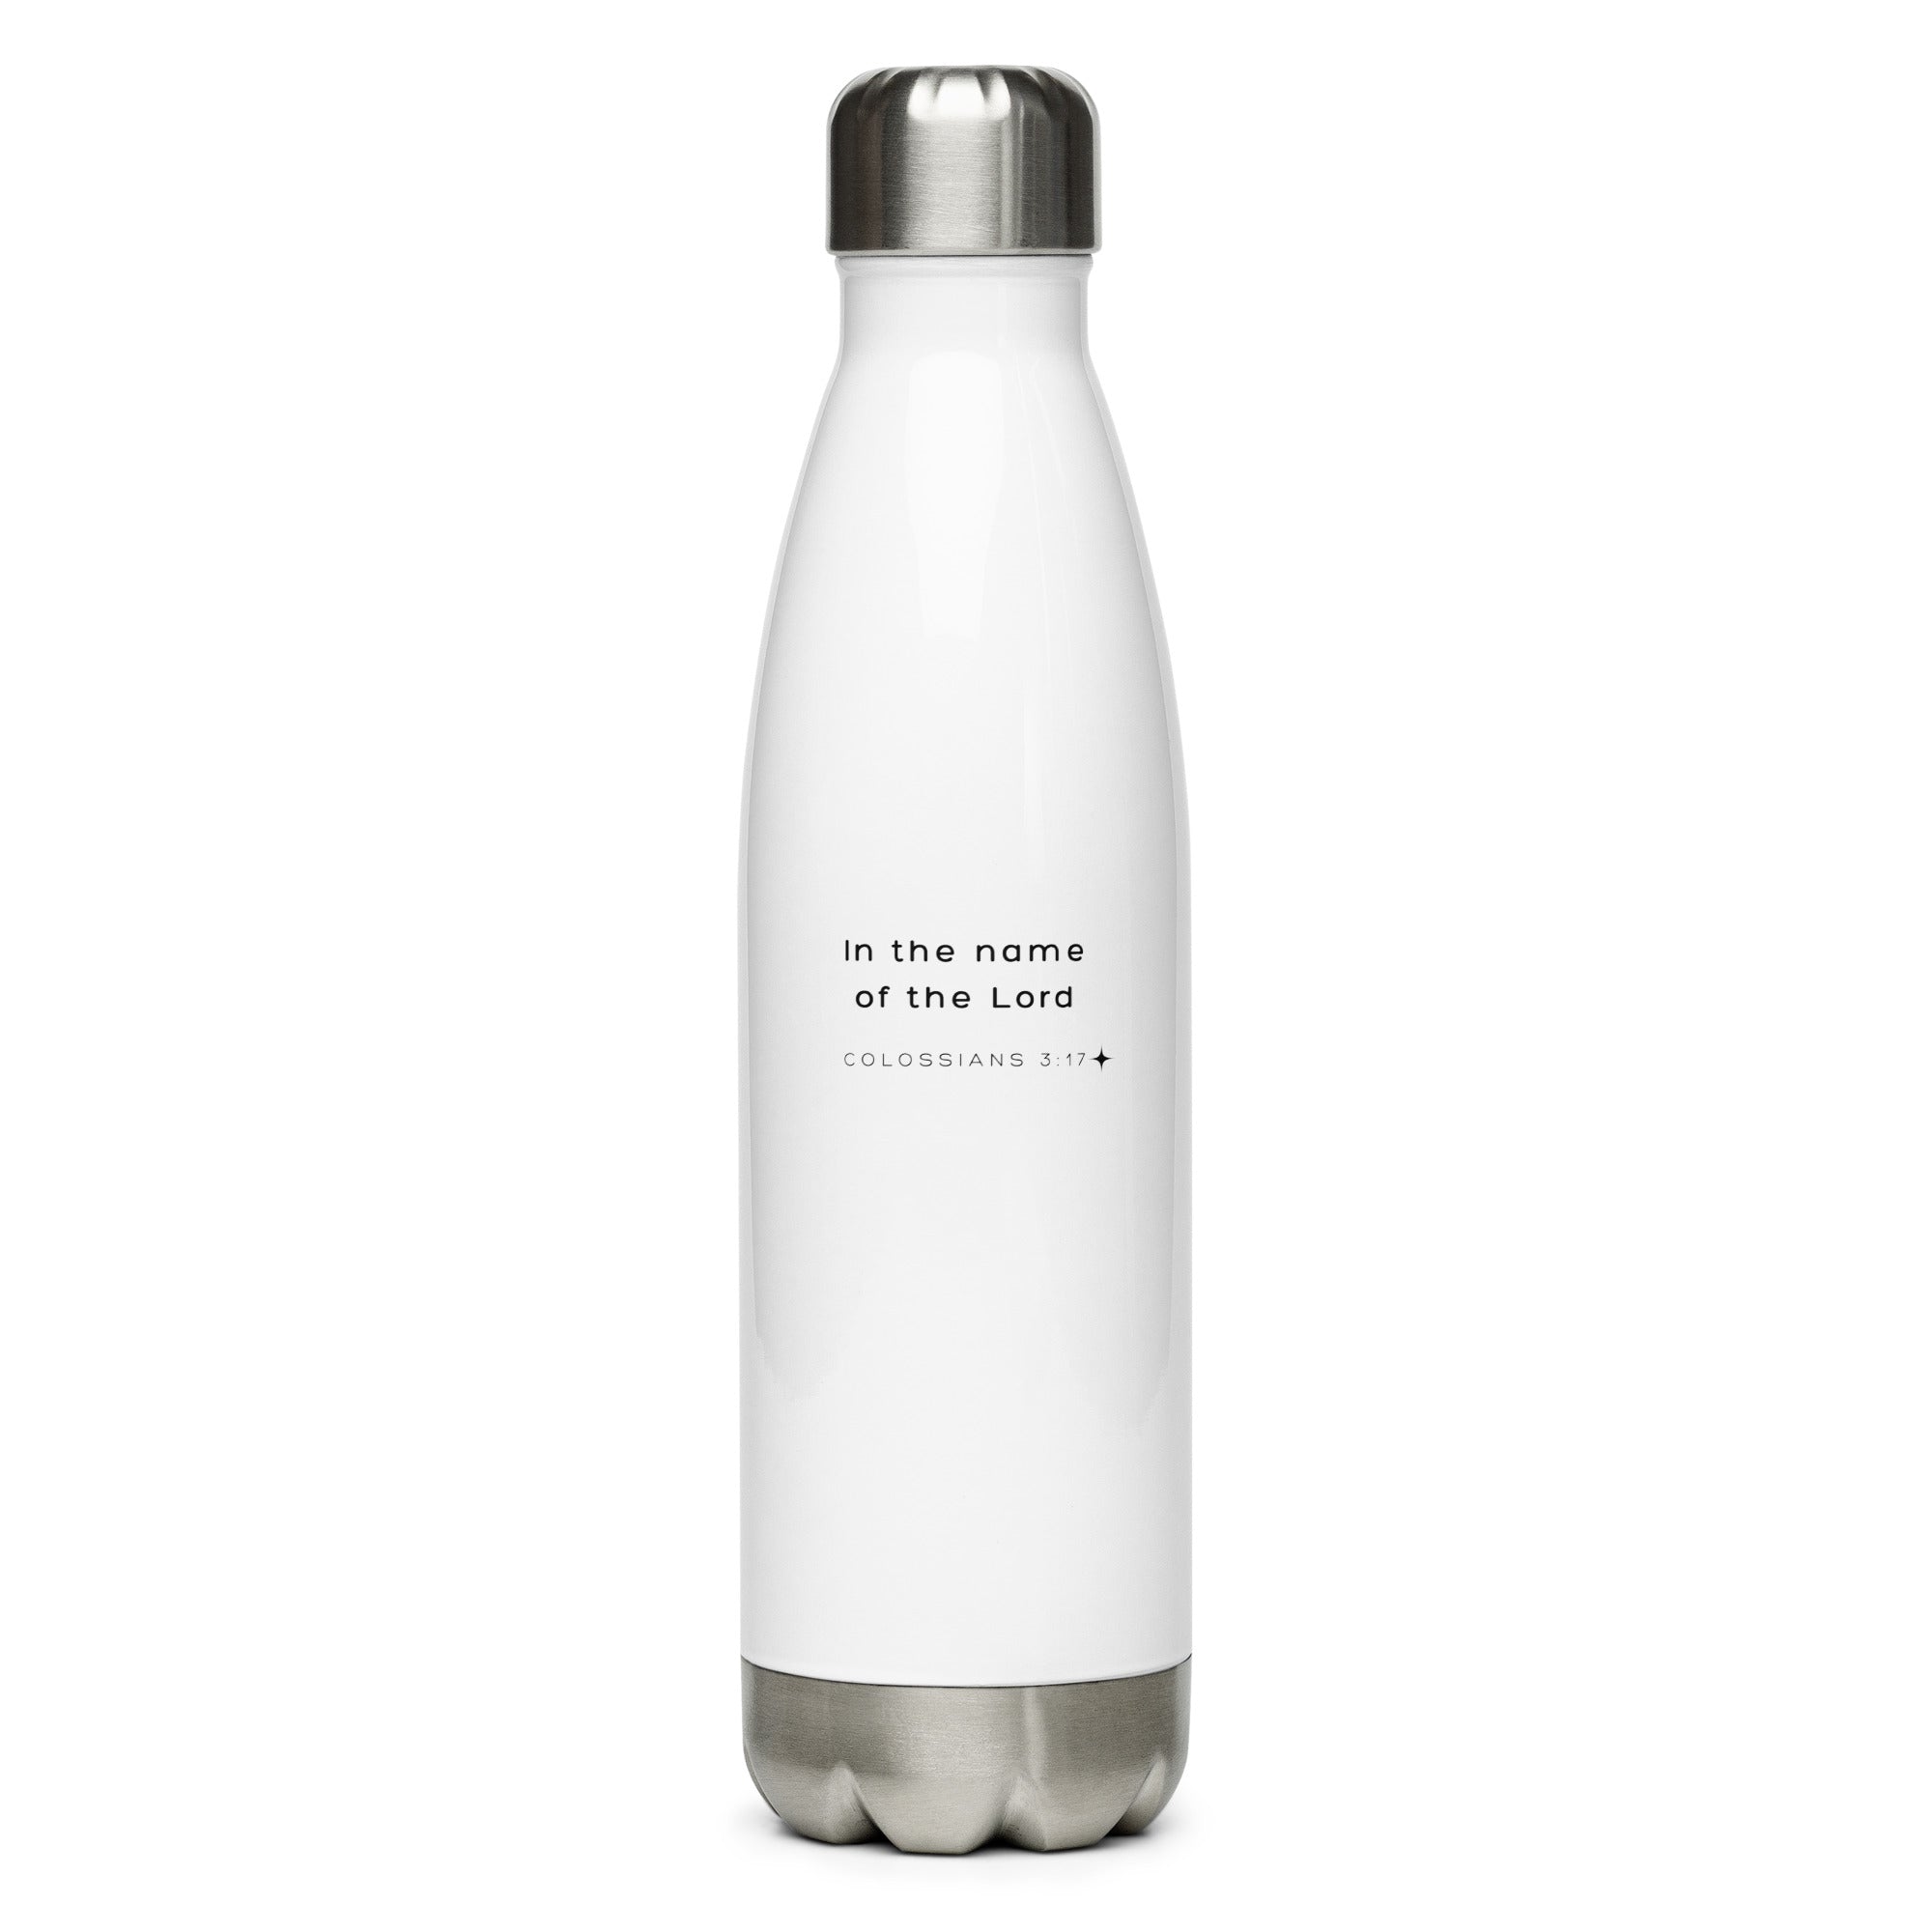 Stainless steel water bottle - Colossians 3:17